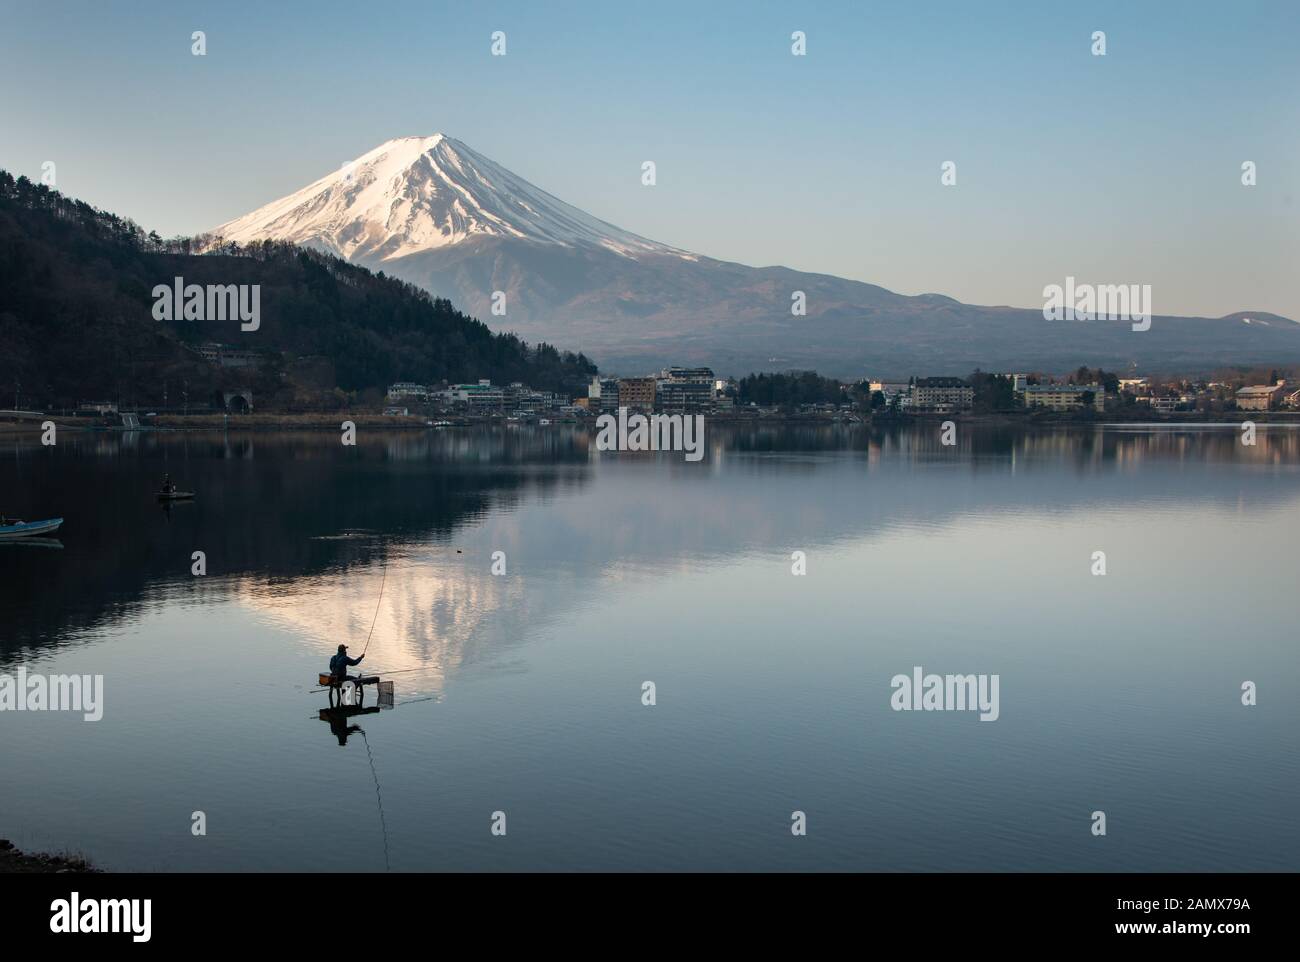 View of Mount Fuji reflected in the lake Kawaguchiko with fishermen out fishing on the lake Stock Photo